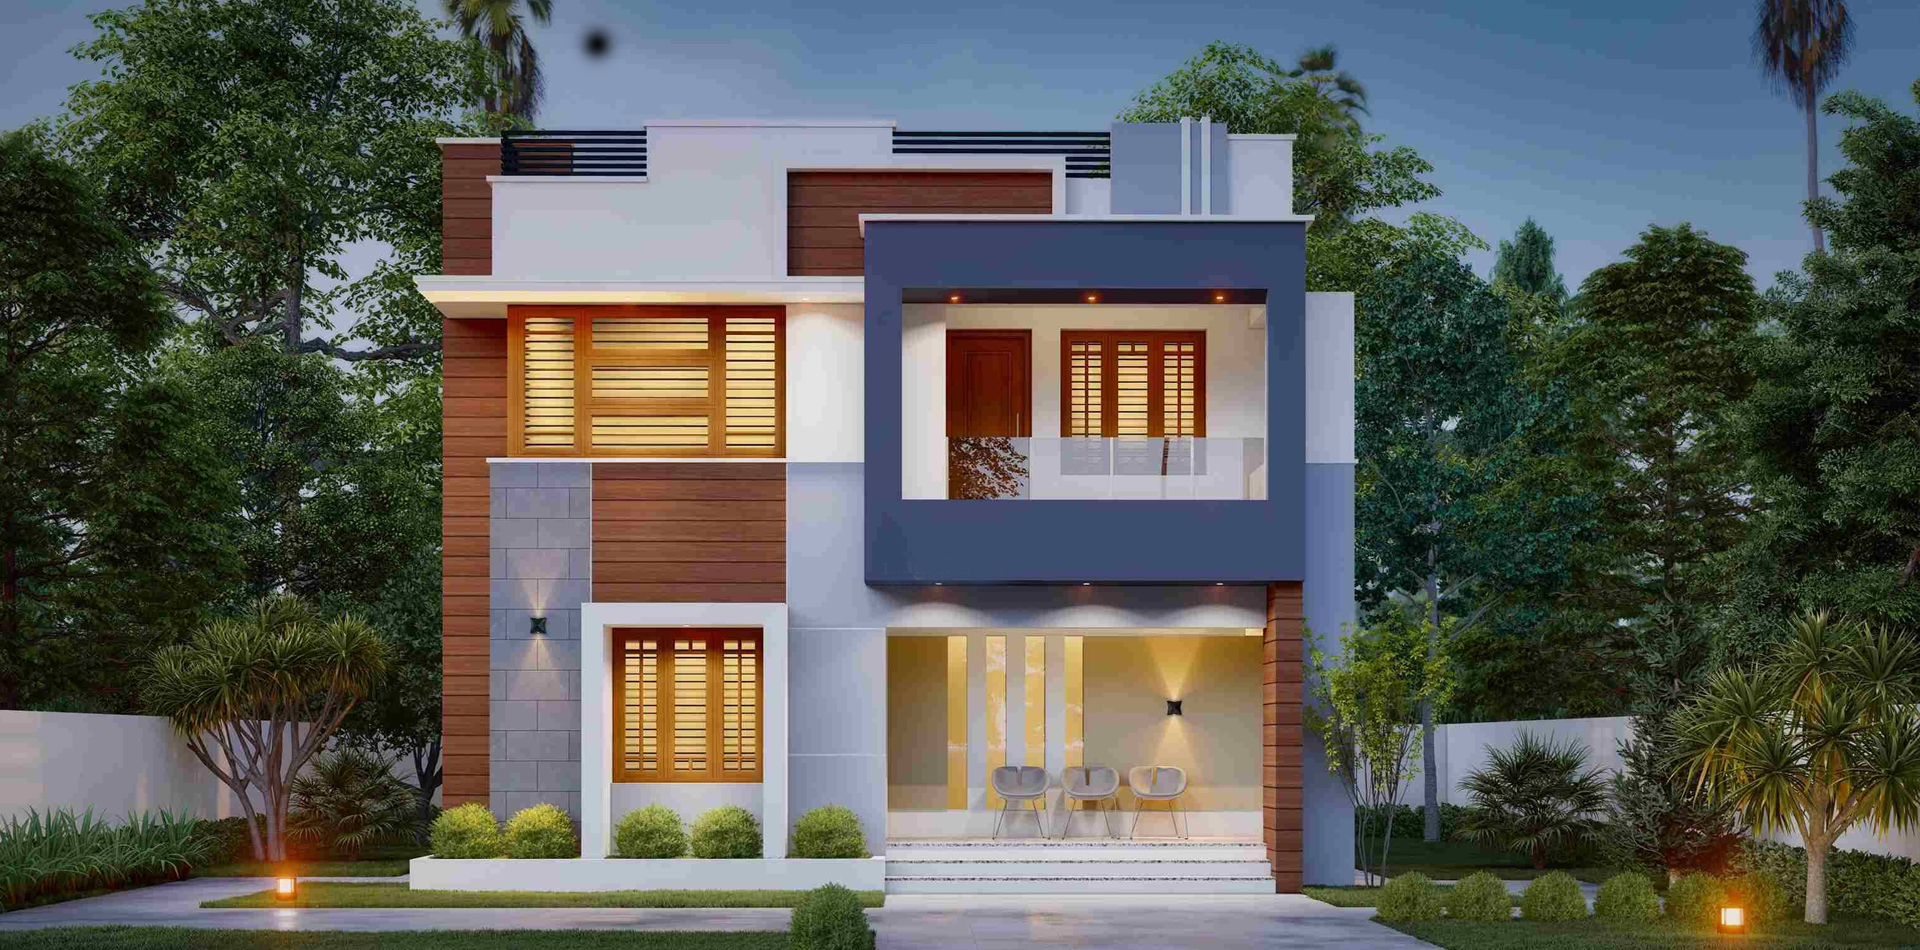 Construction in Chennai,Civil Construction in Chennai,Building Construction in Chennai